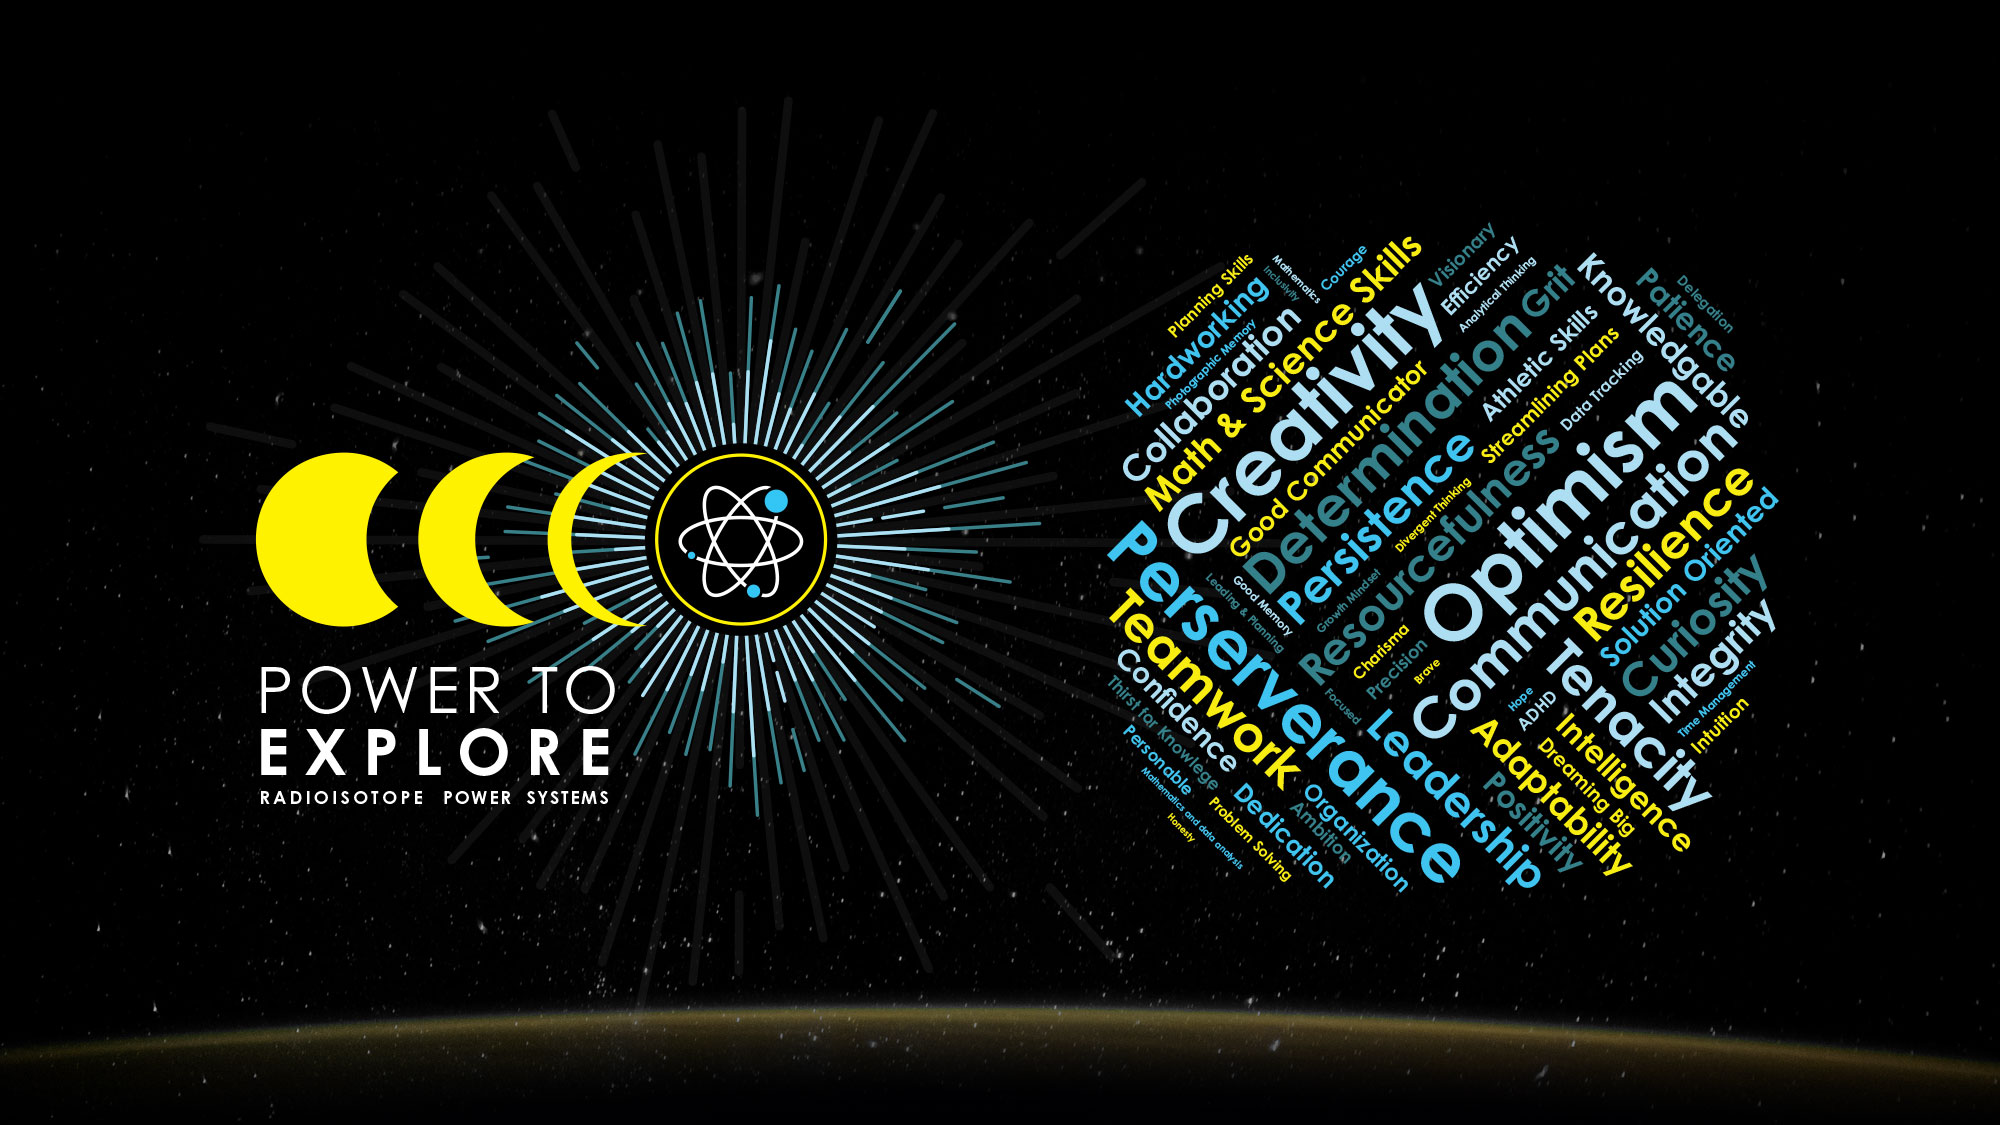 On the left, the Power to Explore logo shows an eclipse transforming into an atomic symboil. The right features a word cloud in which creativity, optimism, and determination are the largest words.